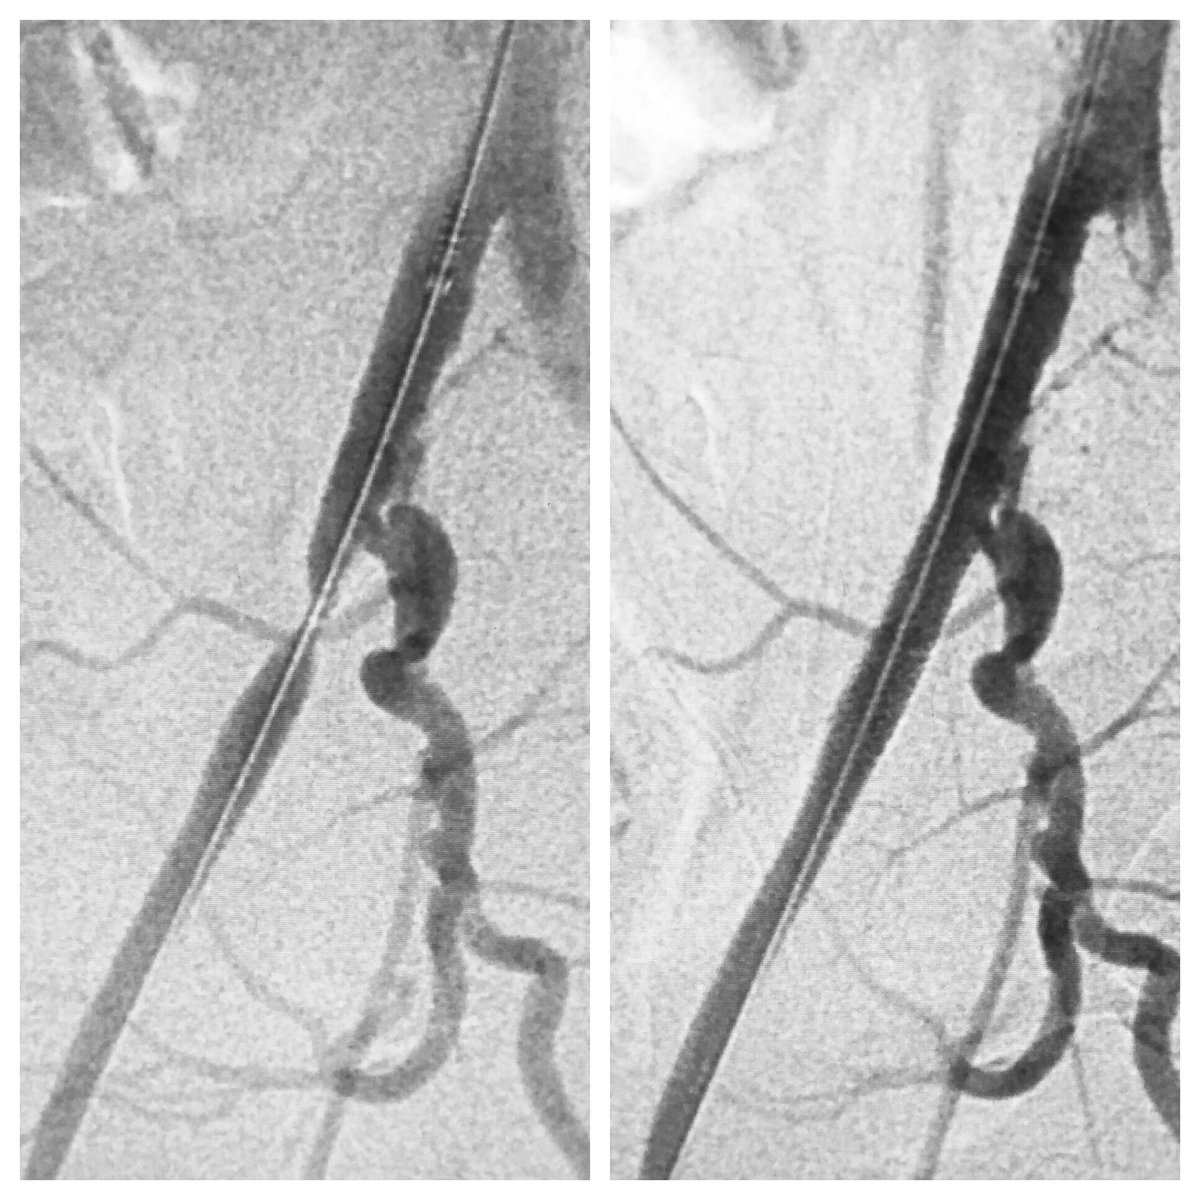 60 y/o F w/R leg #claudication. External iliac artery #stentplacement from a #radial approach. 119cm #SlenderGlidesheath from. 27mm #ExpressLDBalloonMountedStent. #MTVIR #RadialFirst #IRad #PVD #PAD #CLI #CliFighter #Podiatry #Atherosclerosis #MIIPs #Ulcer #Wound @drprestongs